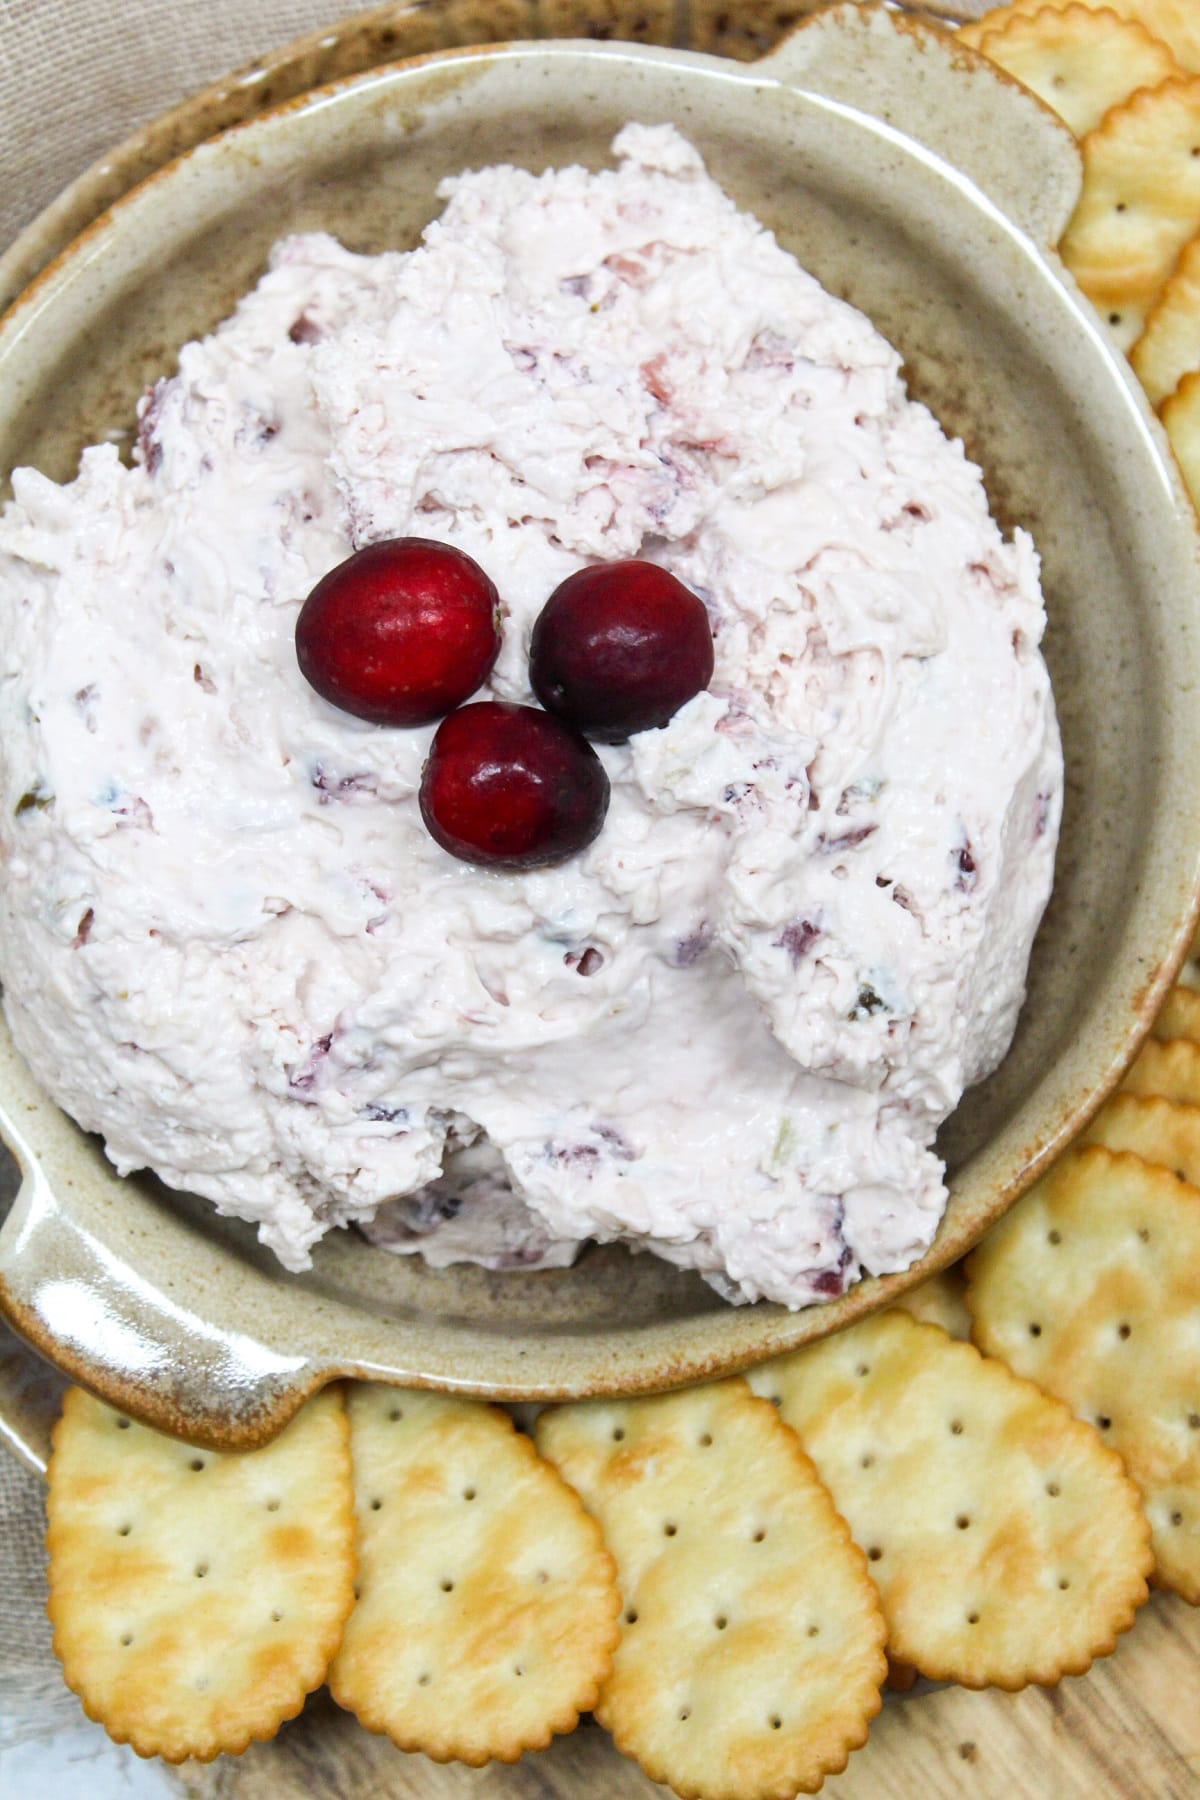 pink cranberry jalapeno dip topped with fresh cranberries on a bowl. Crackers are served on the side of the bowl.